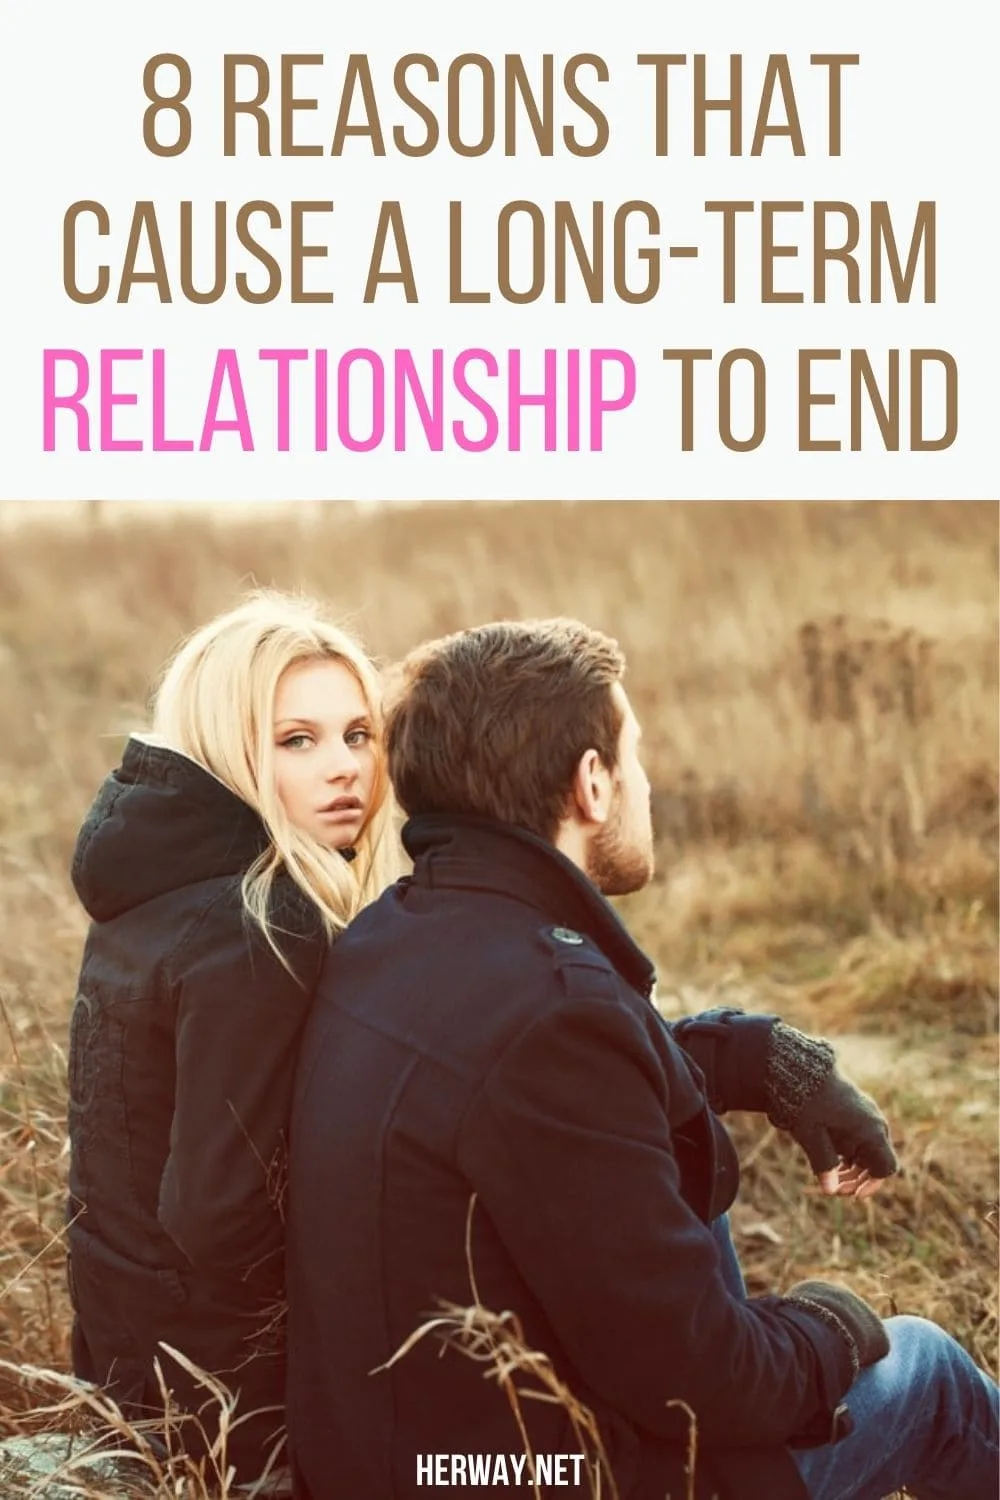 8 Reasons That Cause A Long-Term Relationship To End